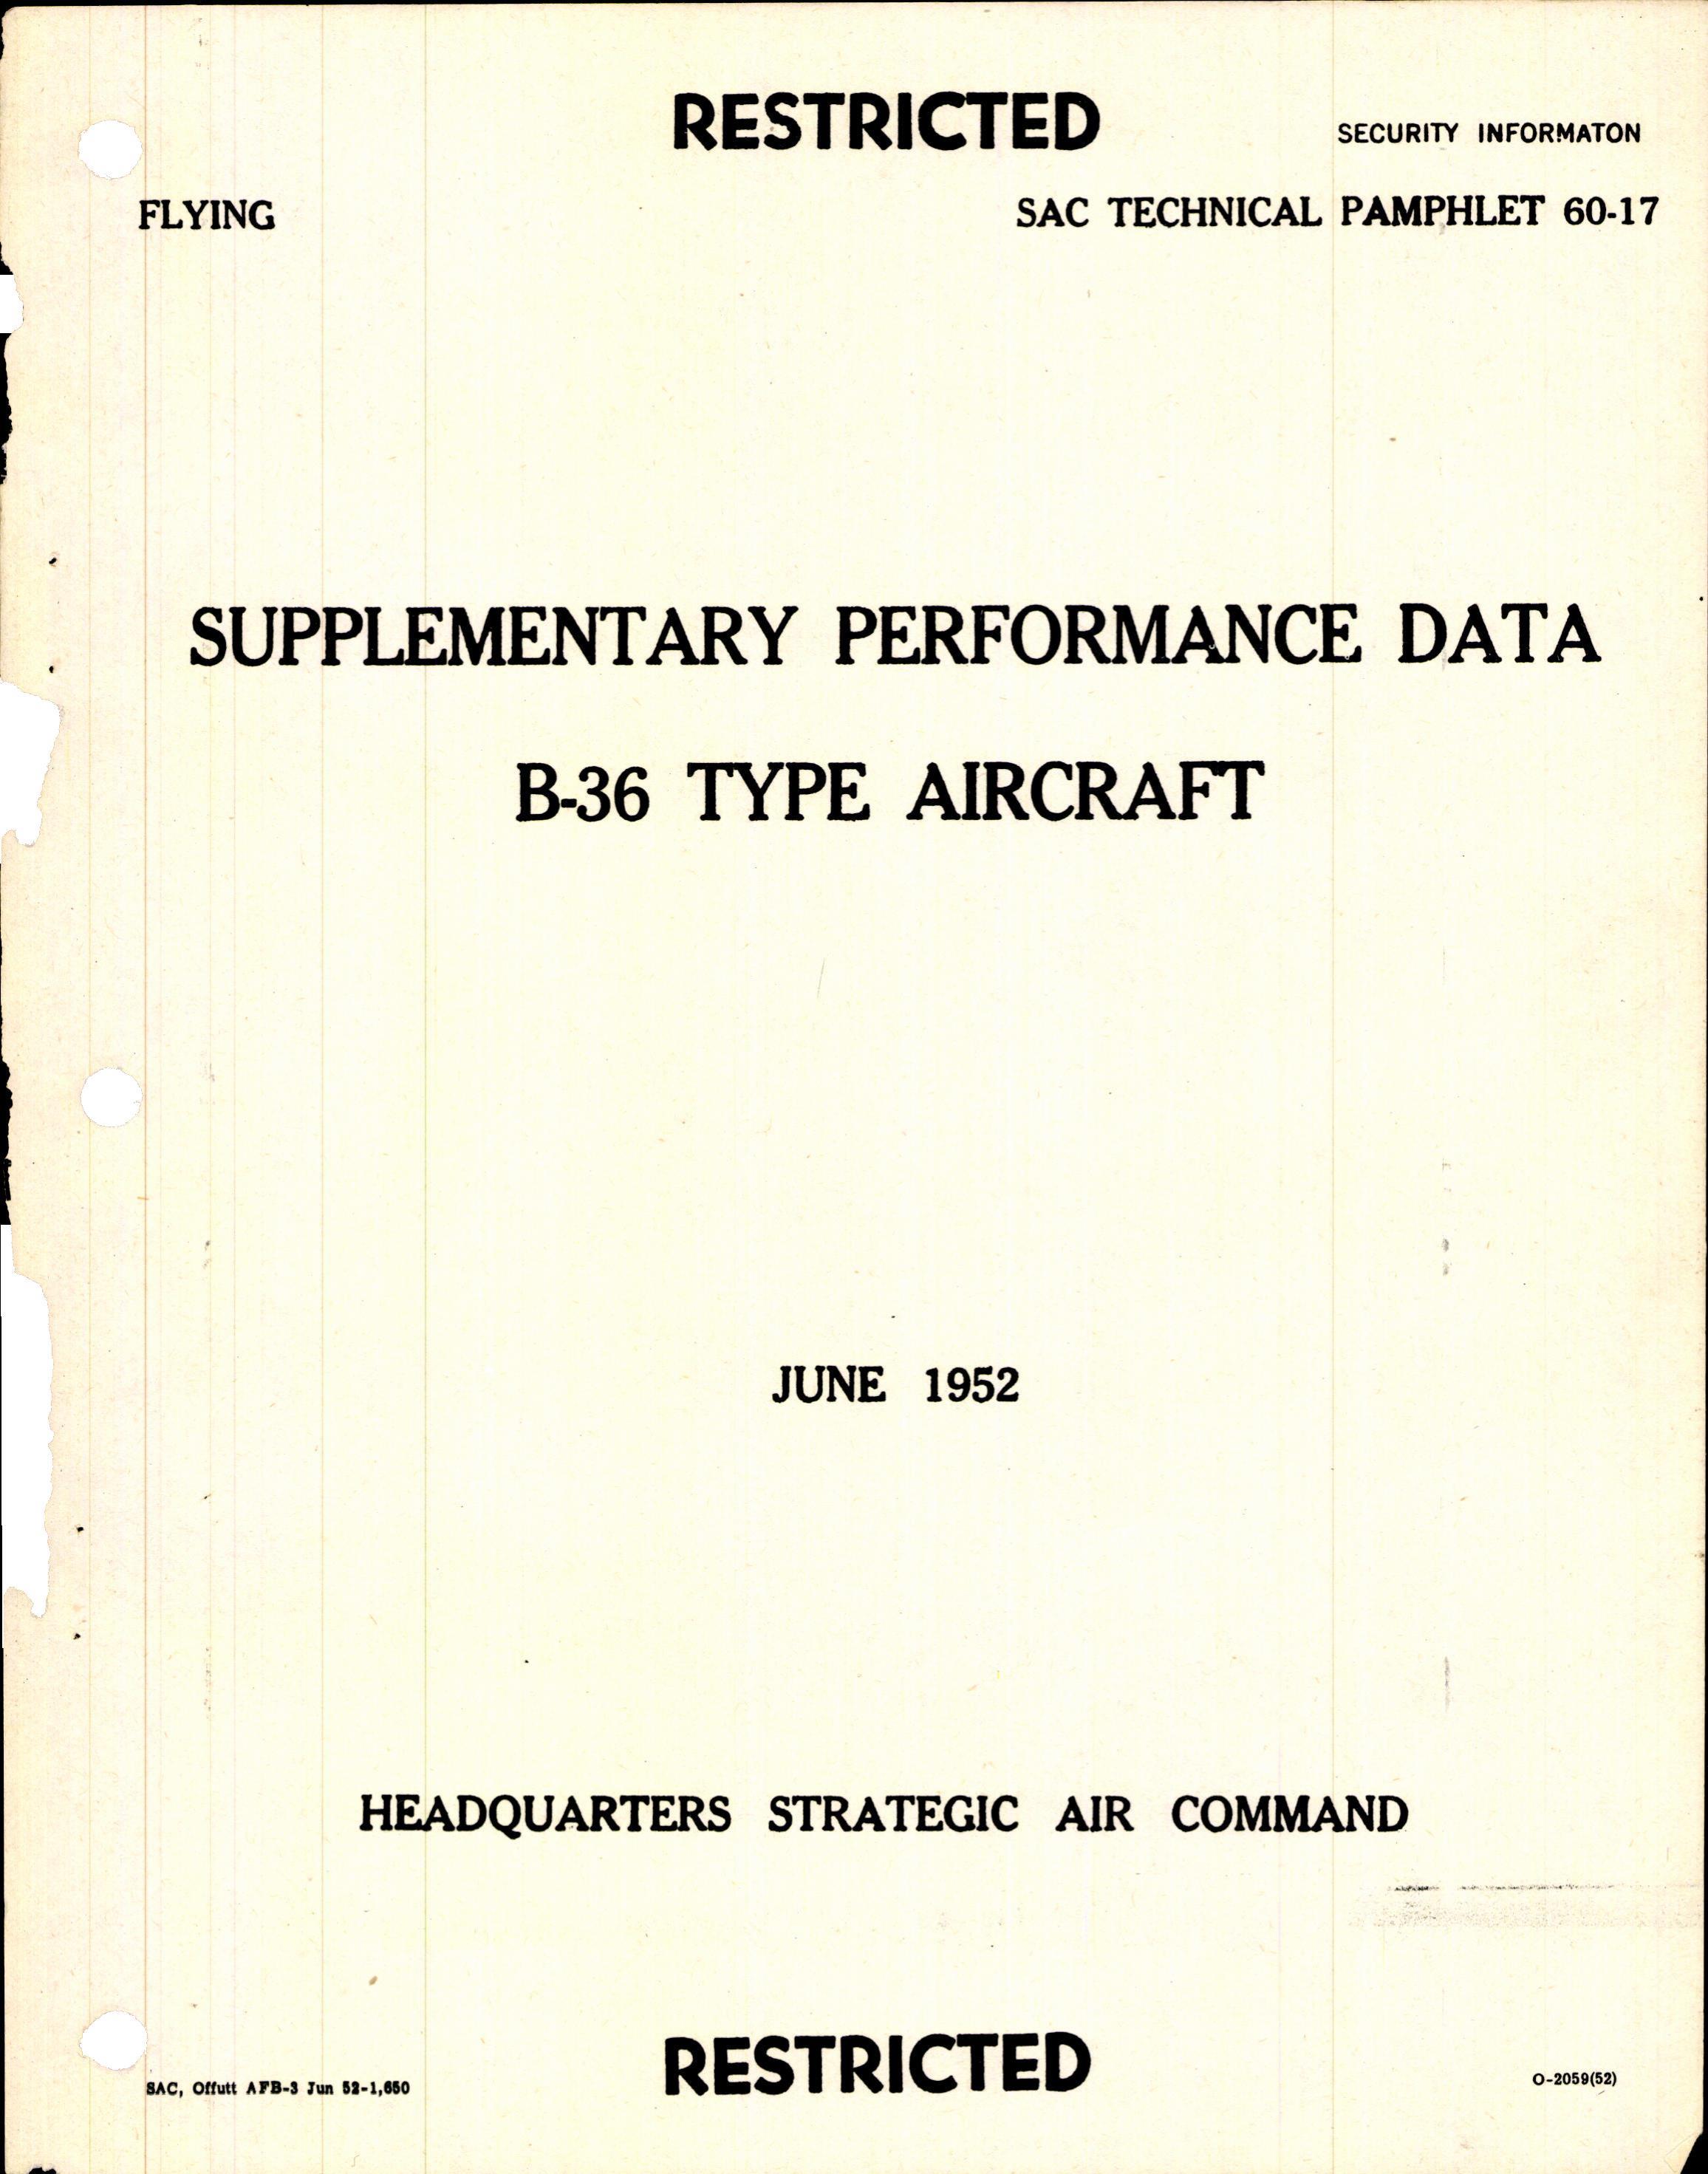 Sample page 7 from AirCorps Library document: Supplementary Performance Data for B-36 Type Aircraft